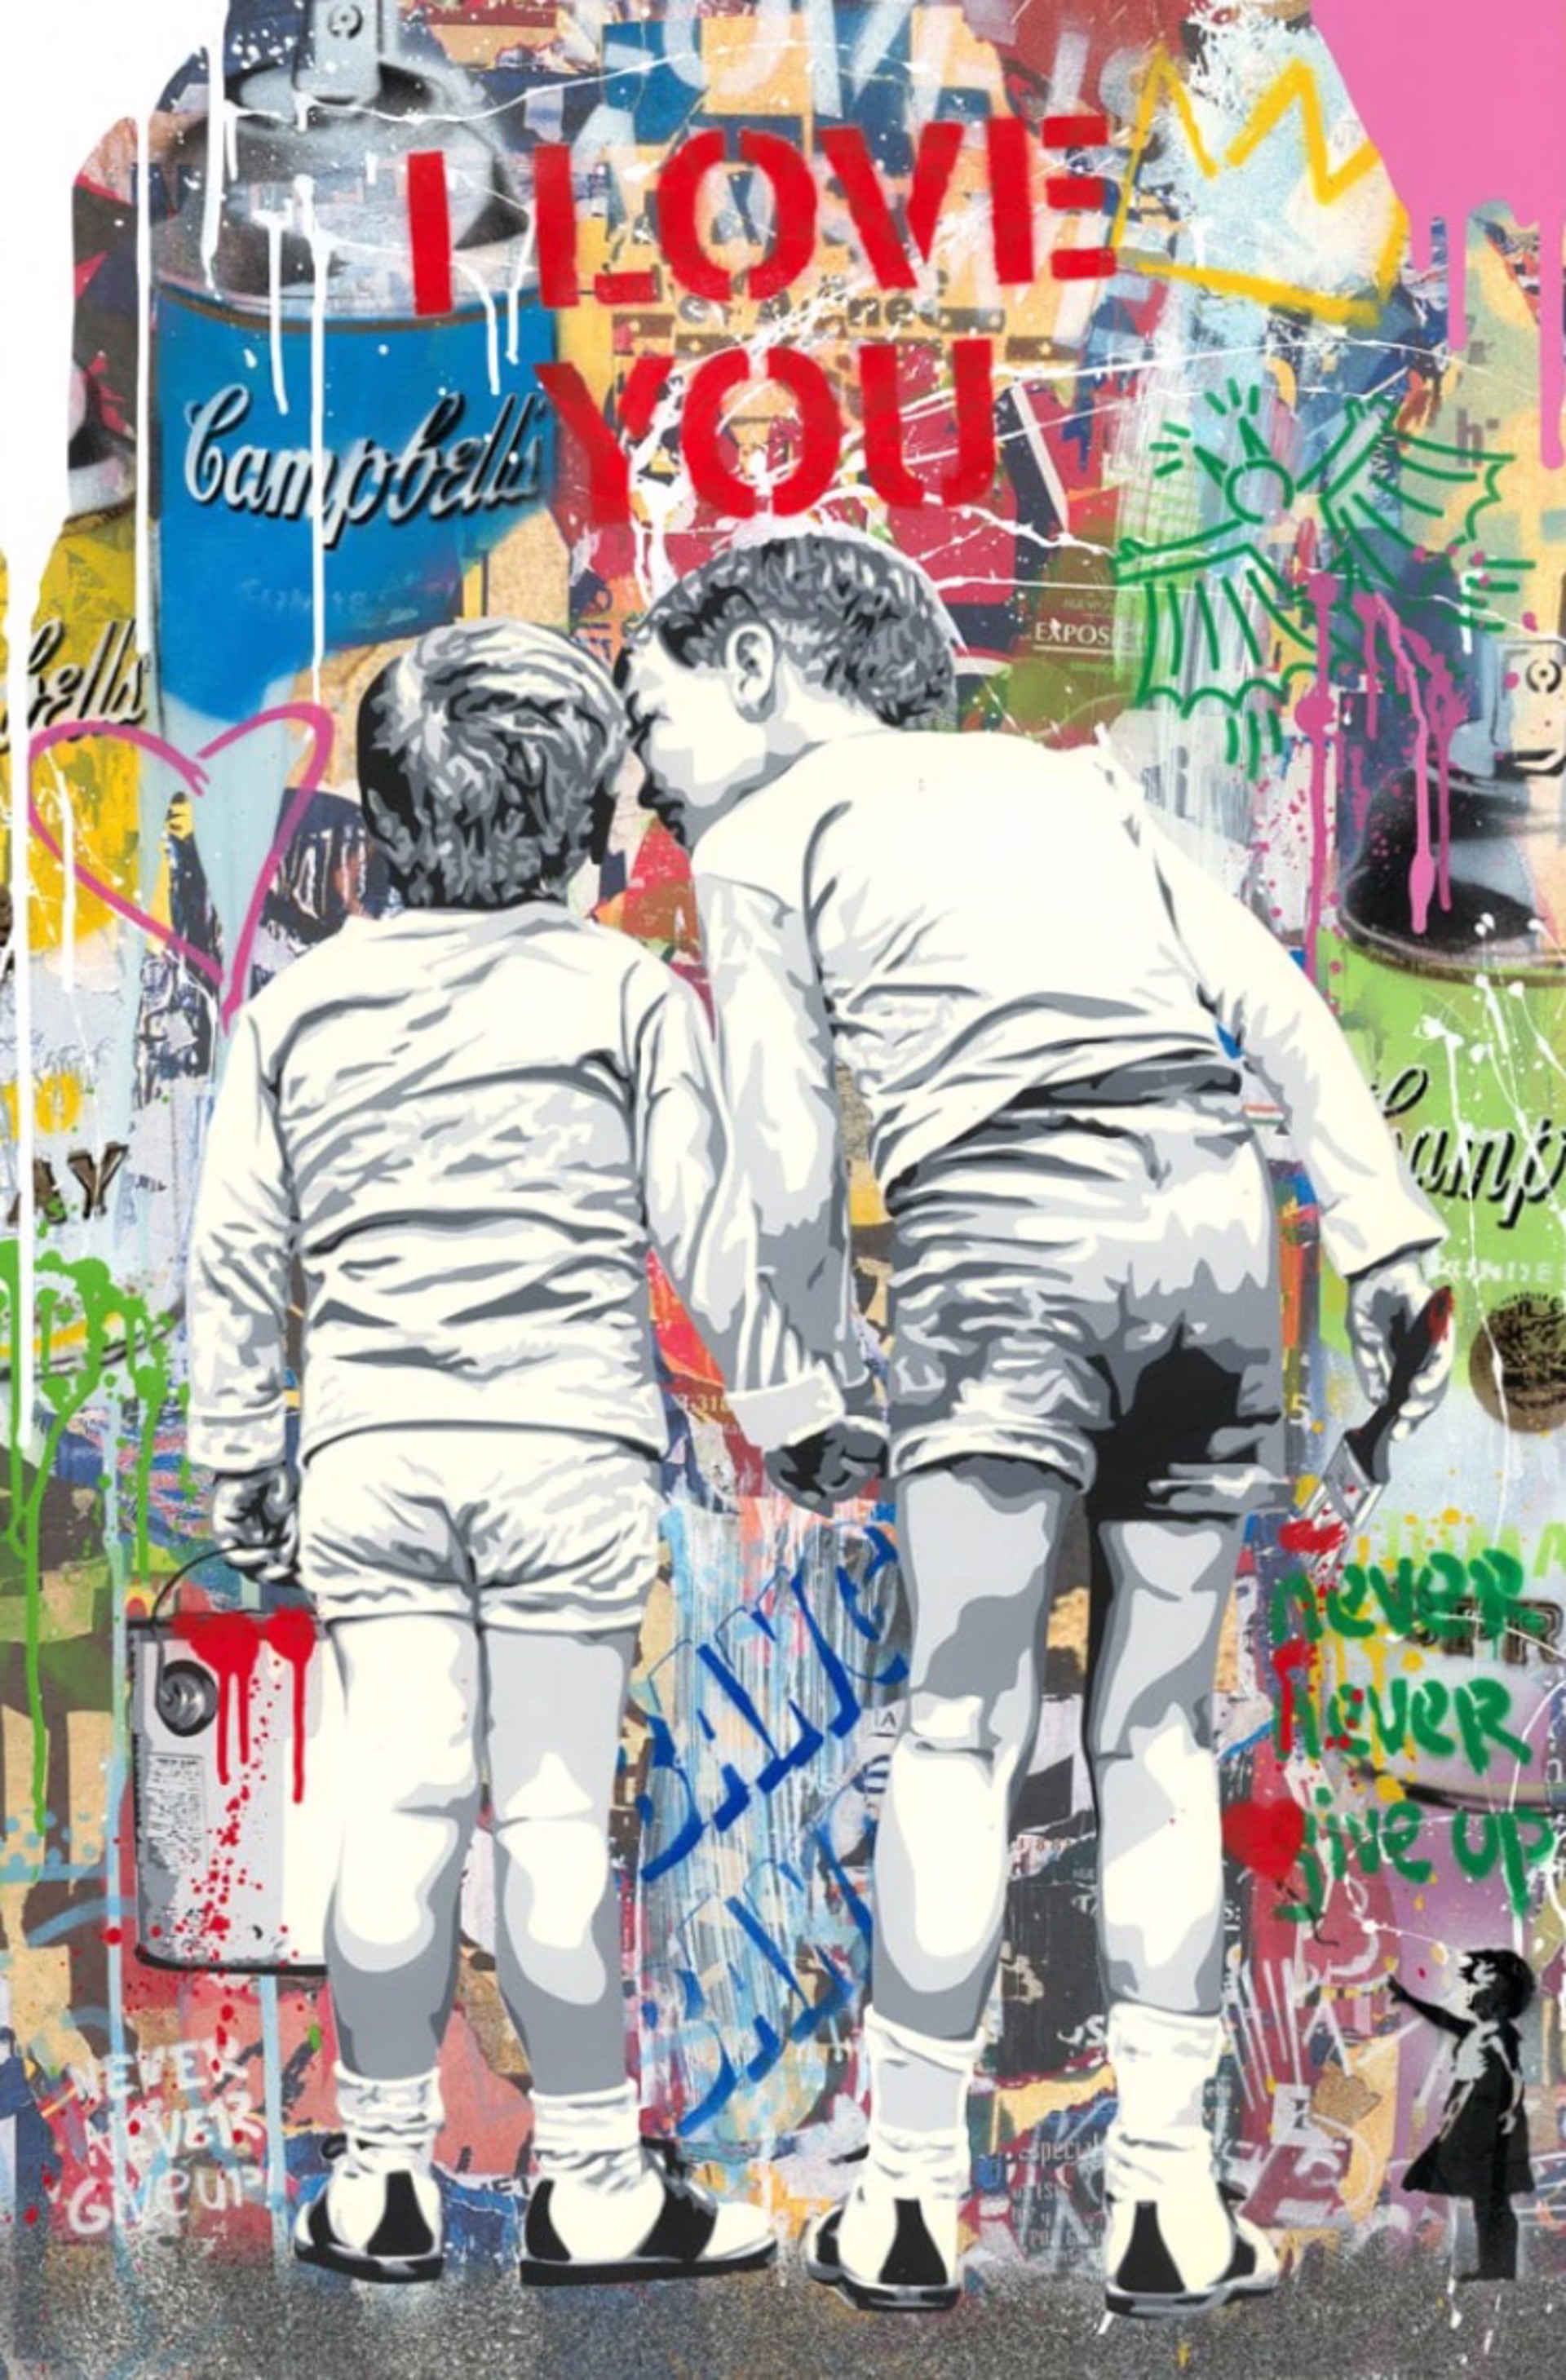 Brother's Advice by Mr. Brainwash